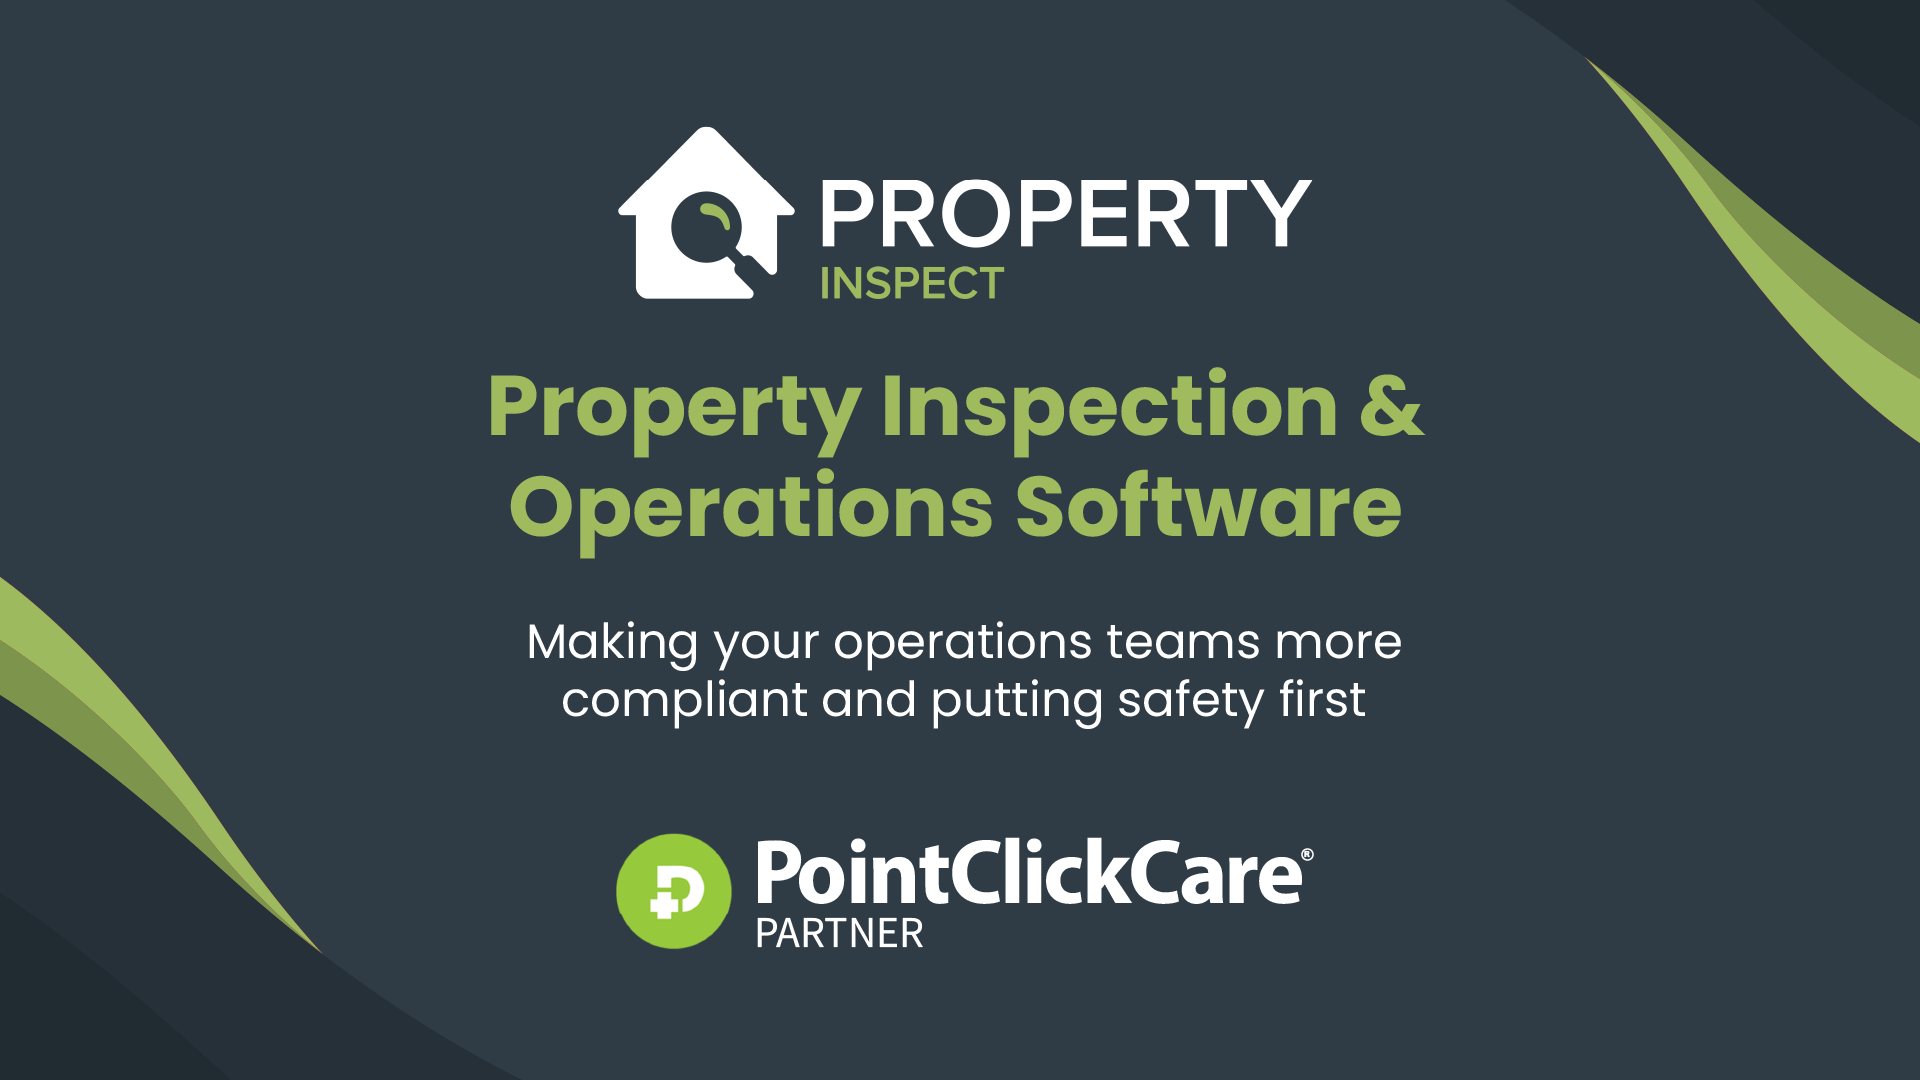 Property Inspect Launches Integration With PointClickCare, Streamlining Senior Housing Compliance Inspections